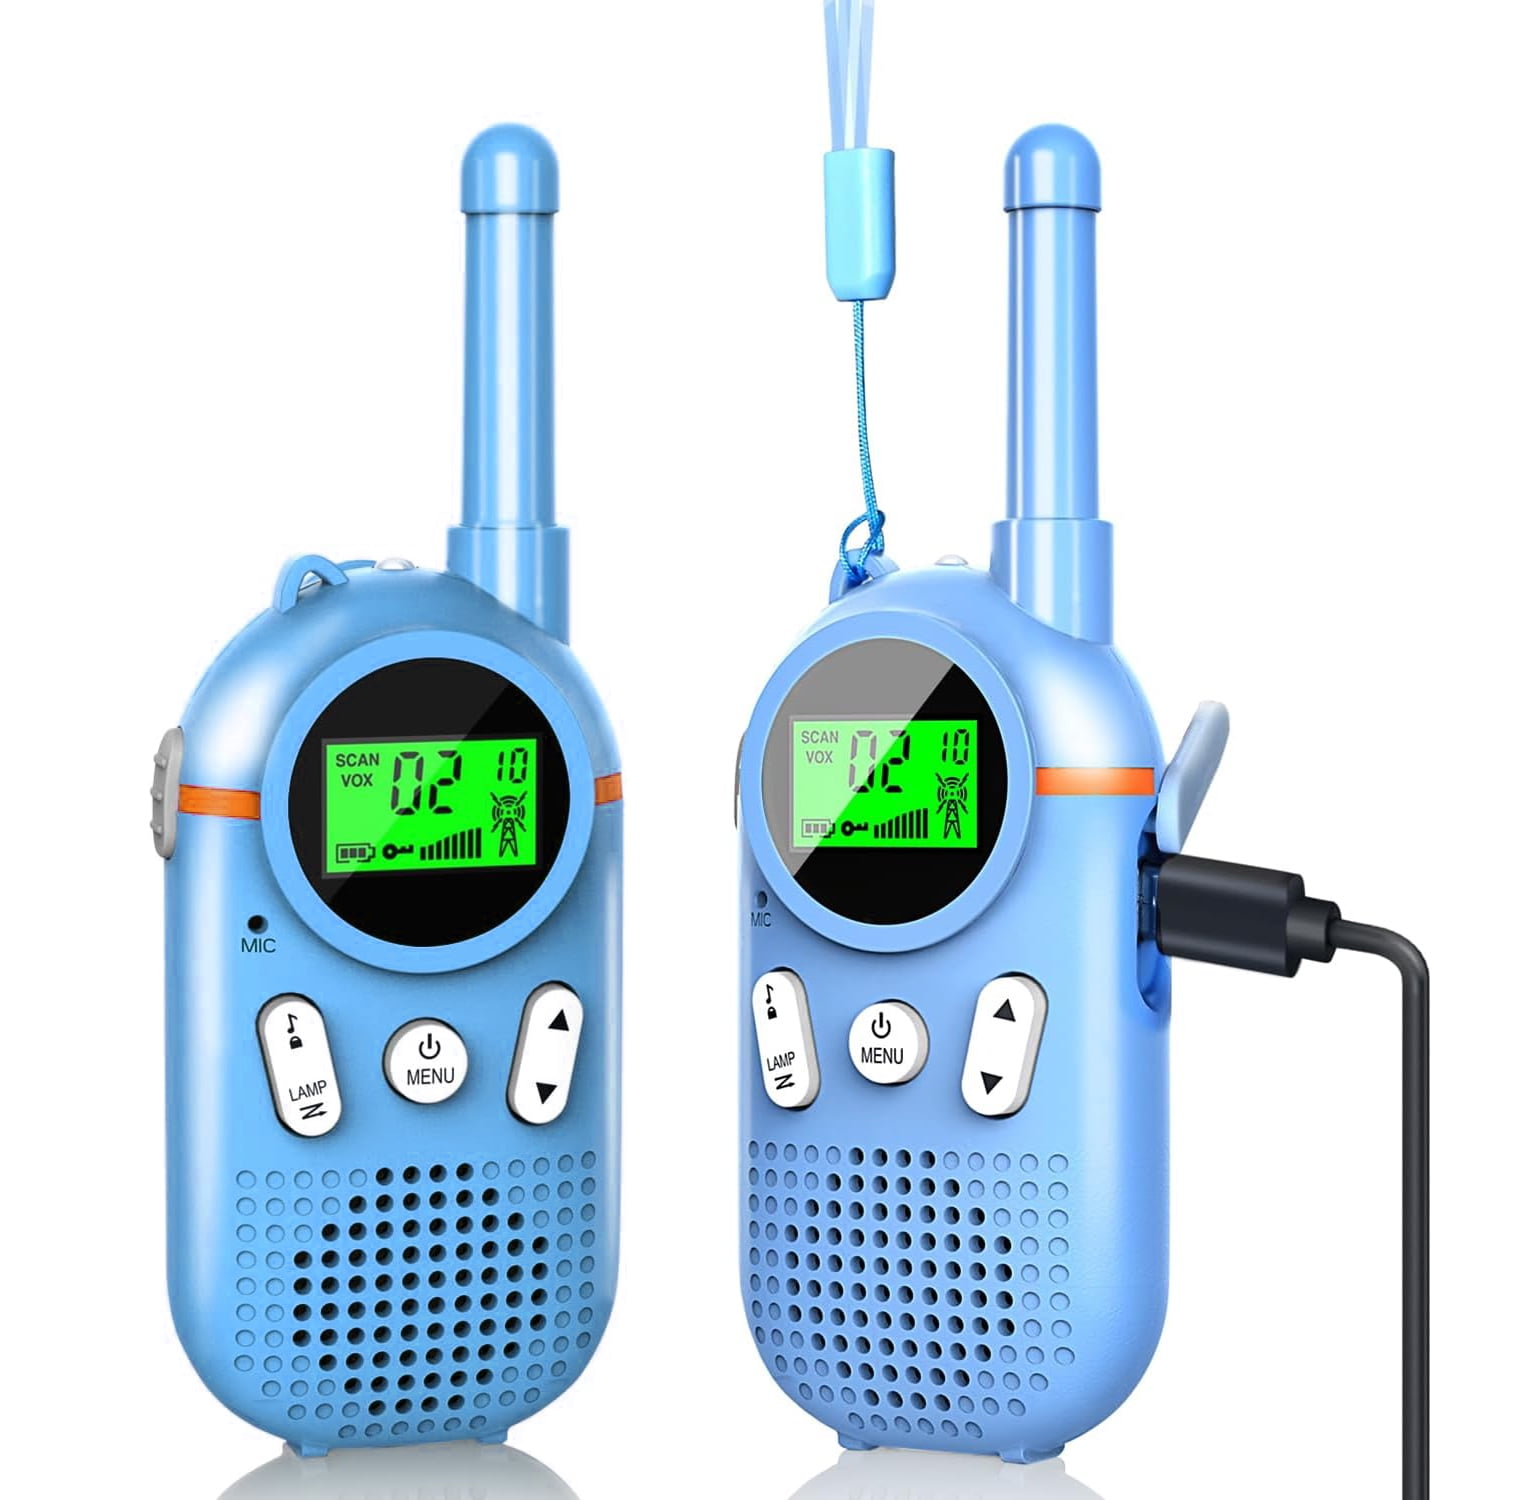 Onn. 23 mile Walkie Talkie 3 pack with Two Way Radios, LED Light, 22 FRS  Channel Options 